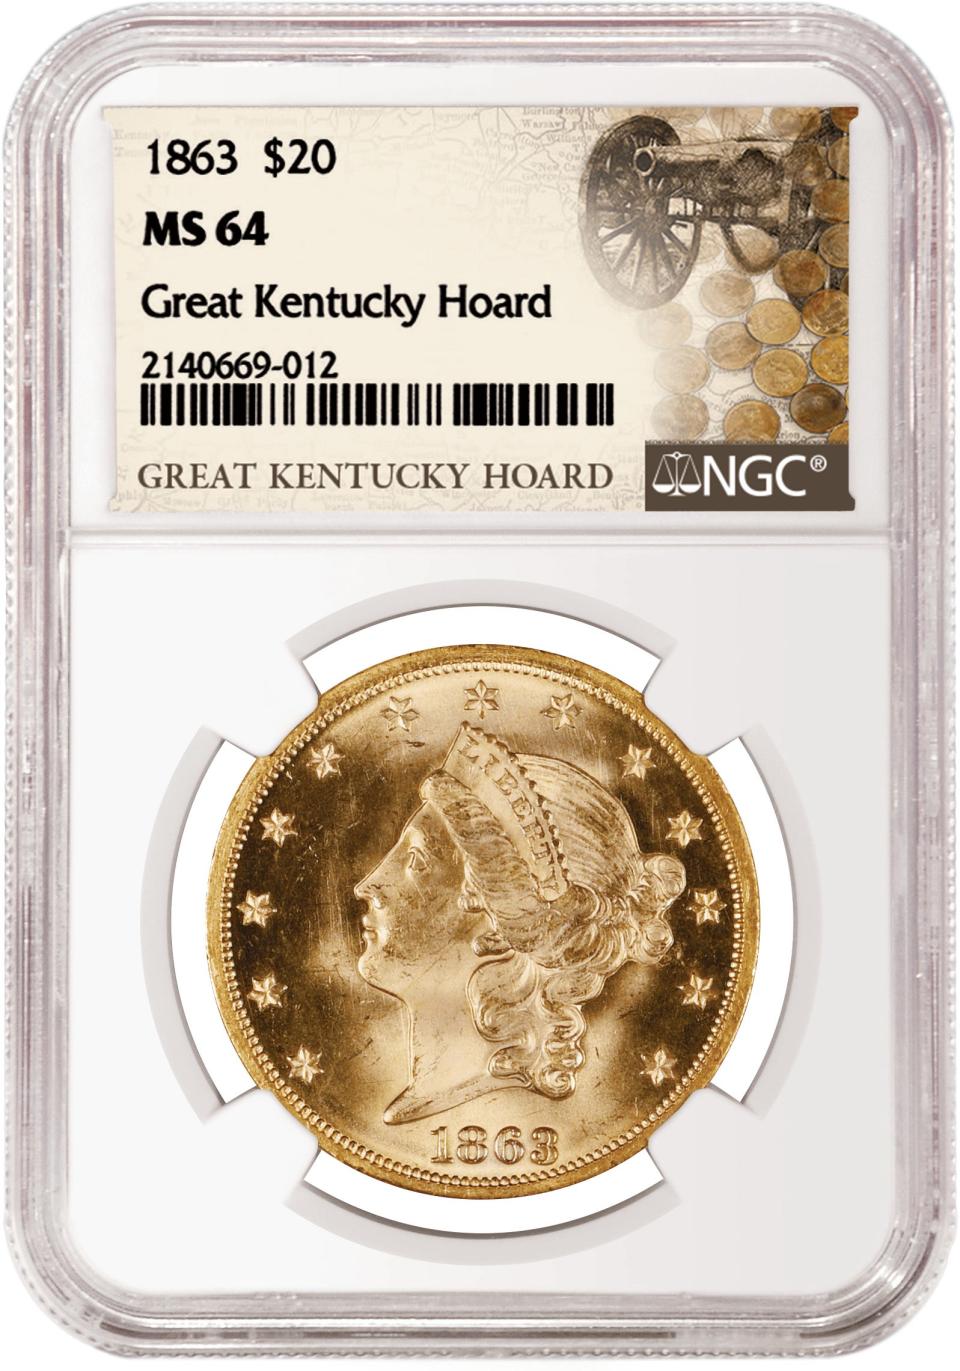 A gold Liberty coin from 1863 in a case labeled “Great Kentucky Hoard.”